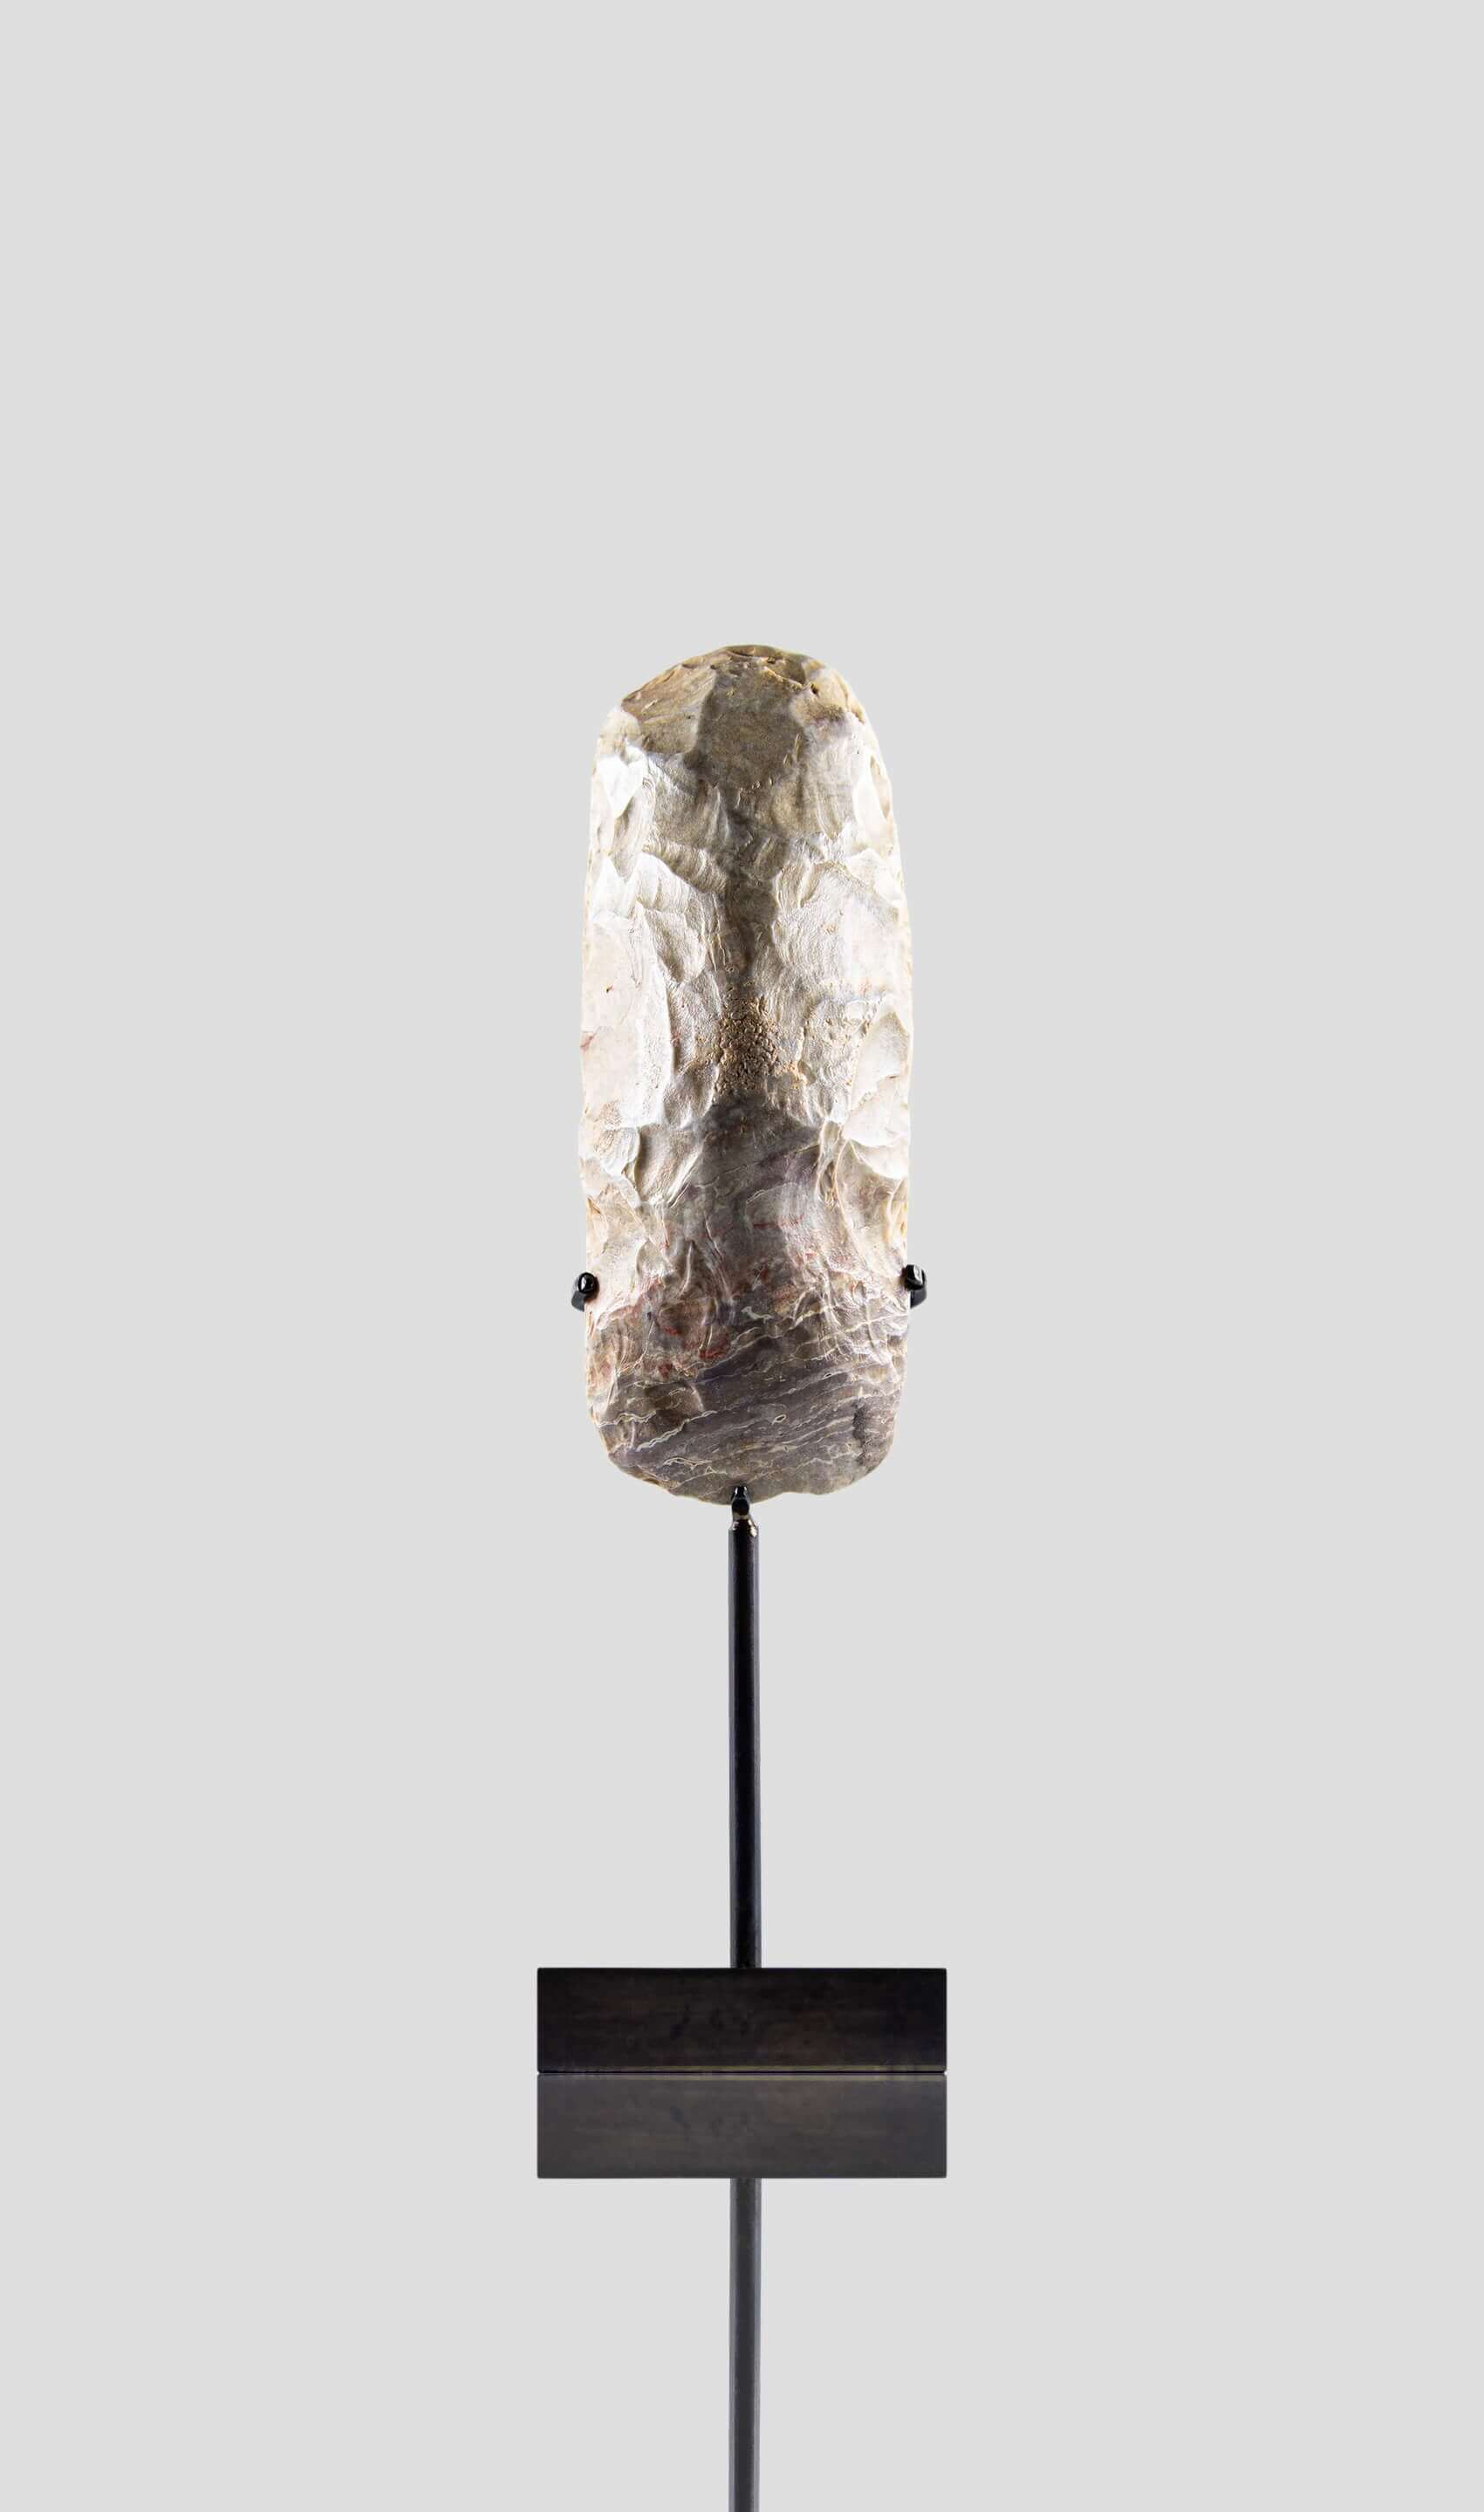 Artefact Neolithic Capsian Hand Axe [8,500 BC] 136mm